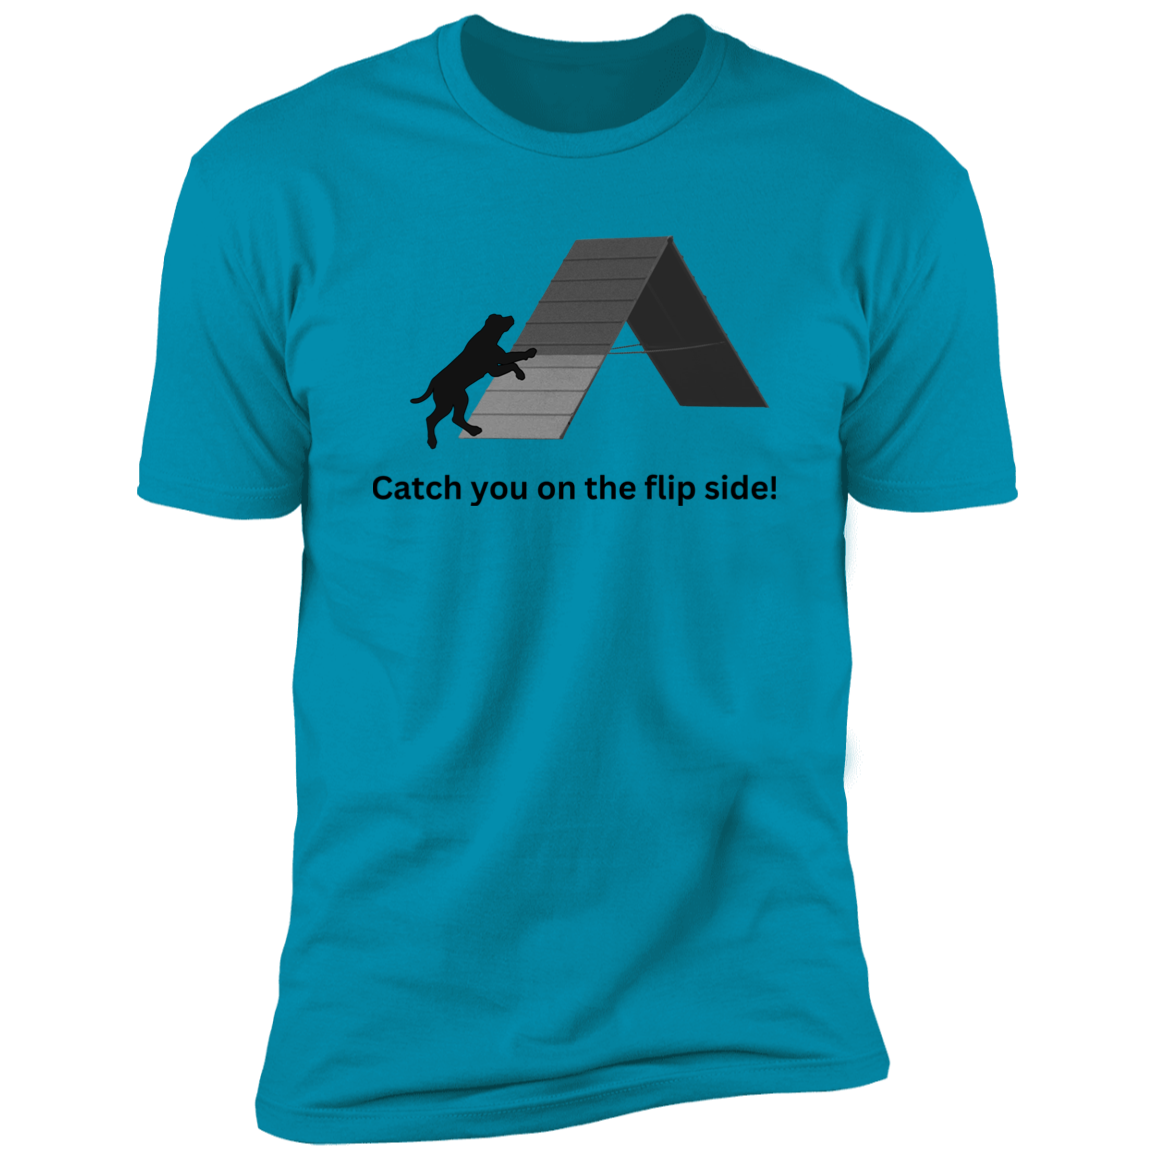 Catch You on the Flip Side T-shirt, Dog Agility Shirt for humans, in turquoise